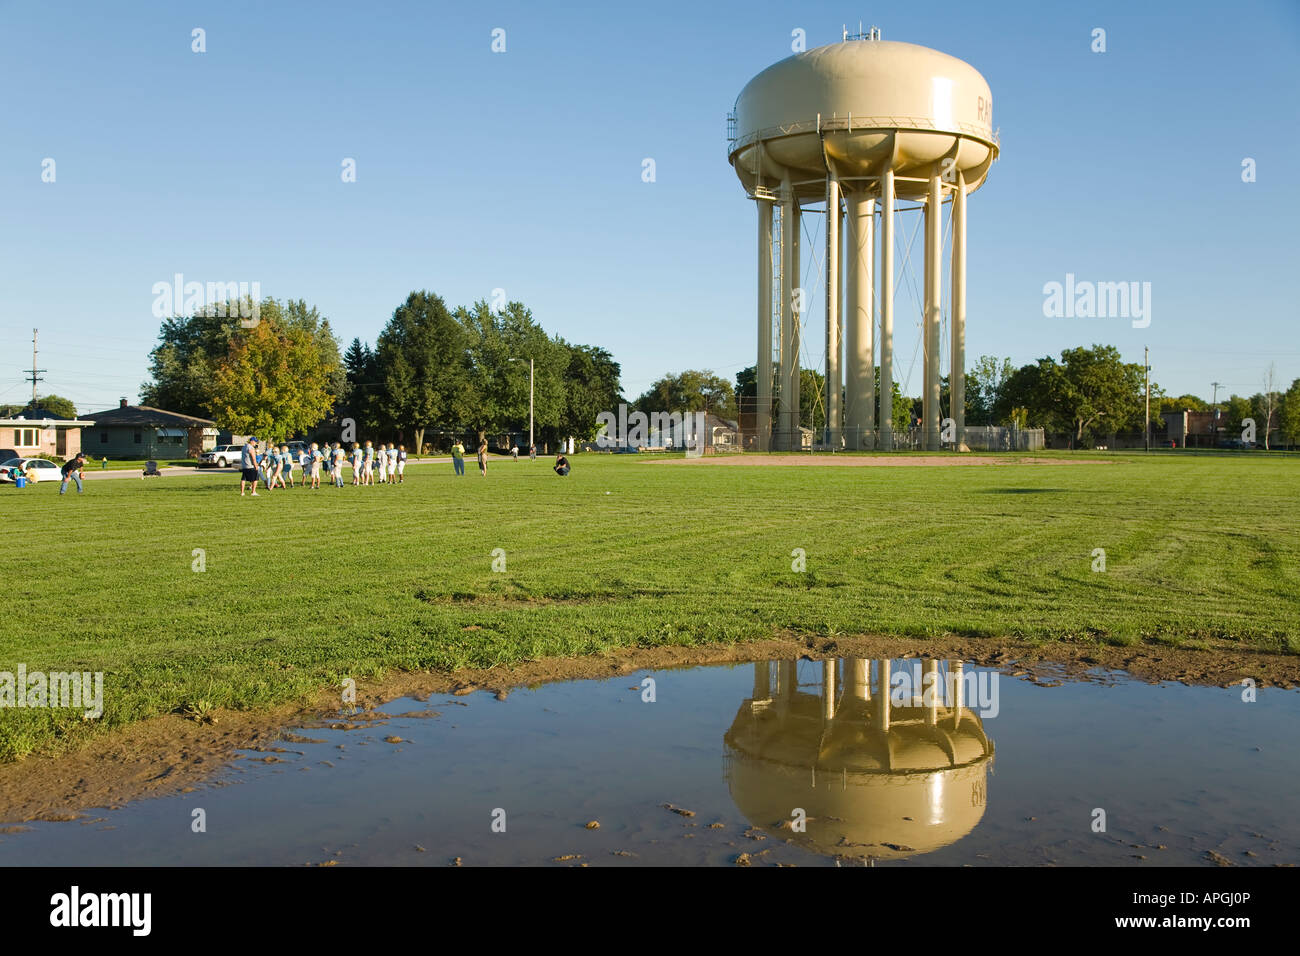 WISCONSIN Racine Middle school students having football practice field near water tower reflection in puddle in grass Stock Photo